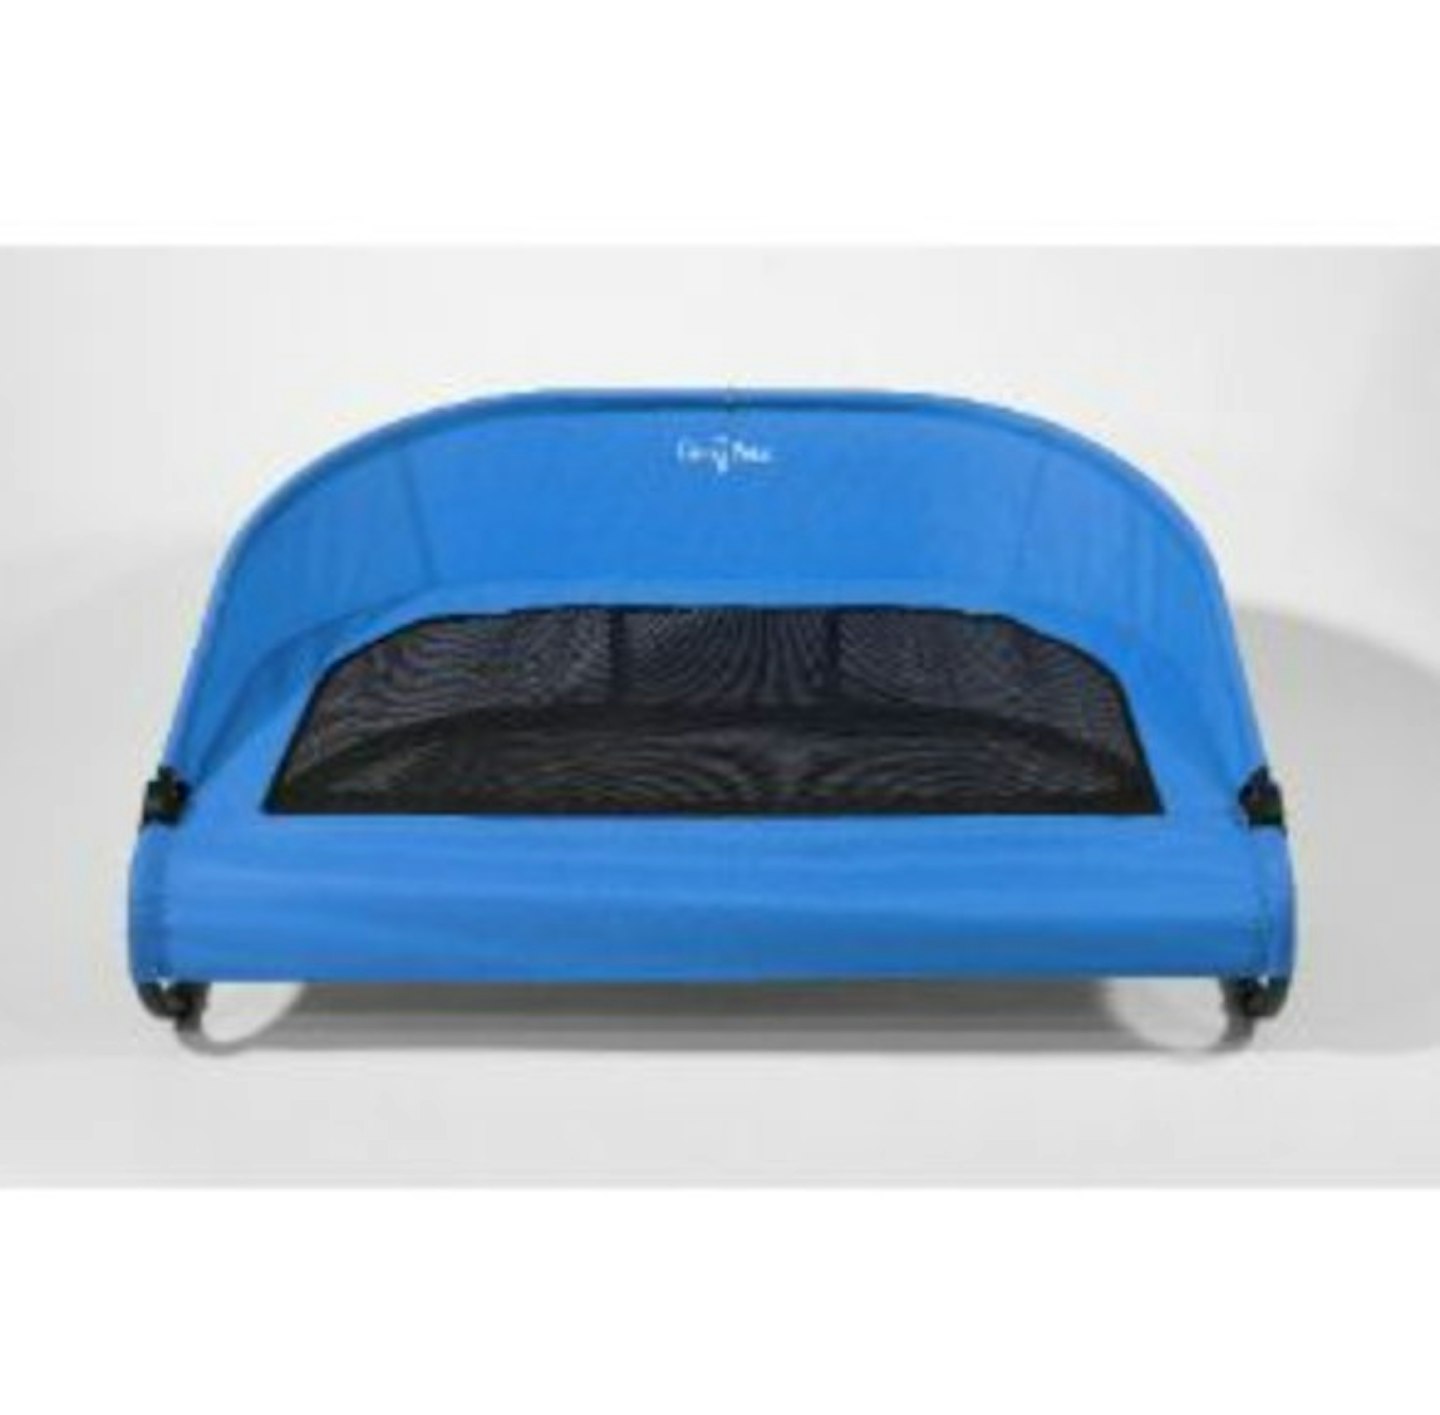 Gen7 Dog and Cat Cool-Air Cot Trailblazer Raised Bed Blue